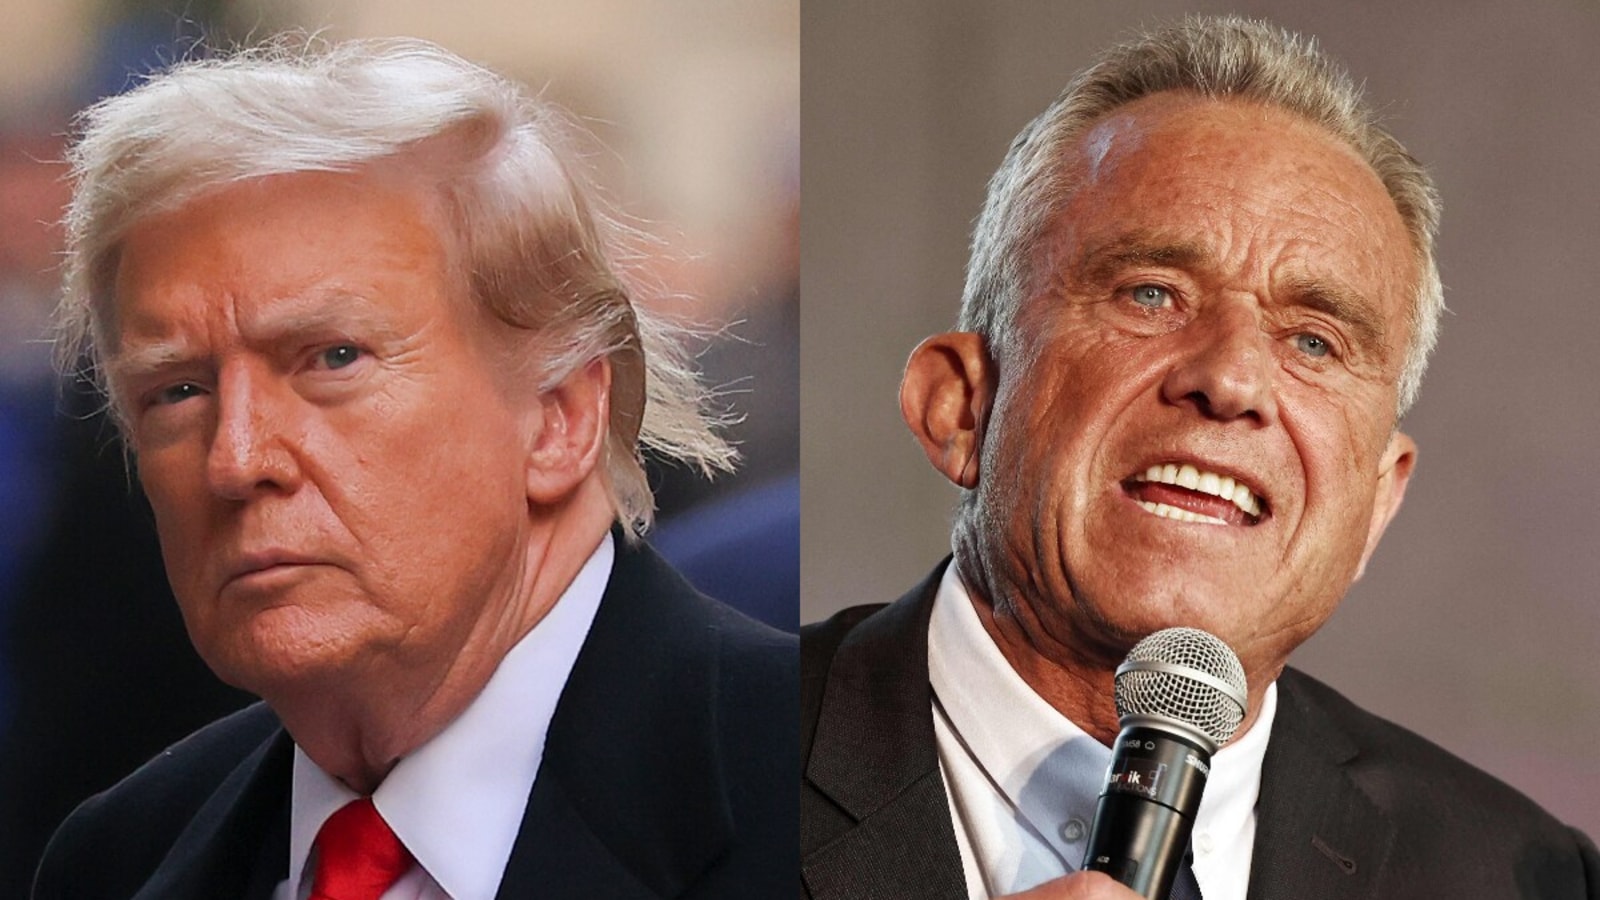 Trump claps back at RFK Jr. for calling him ‘giant coward’ over debate exclusion: ‘He needs needs more than his name…’